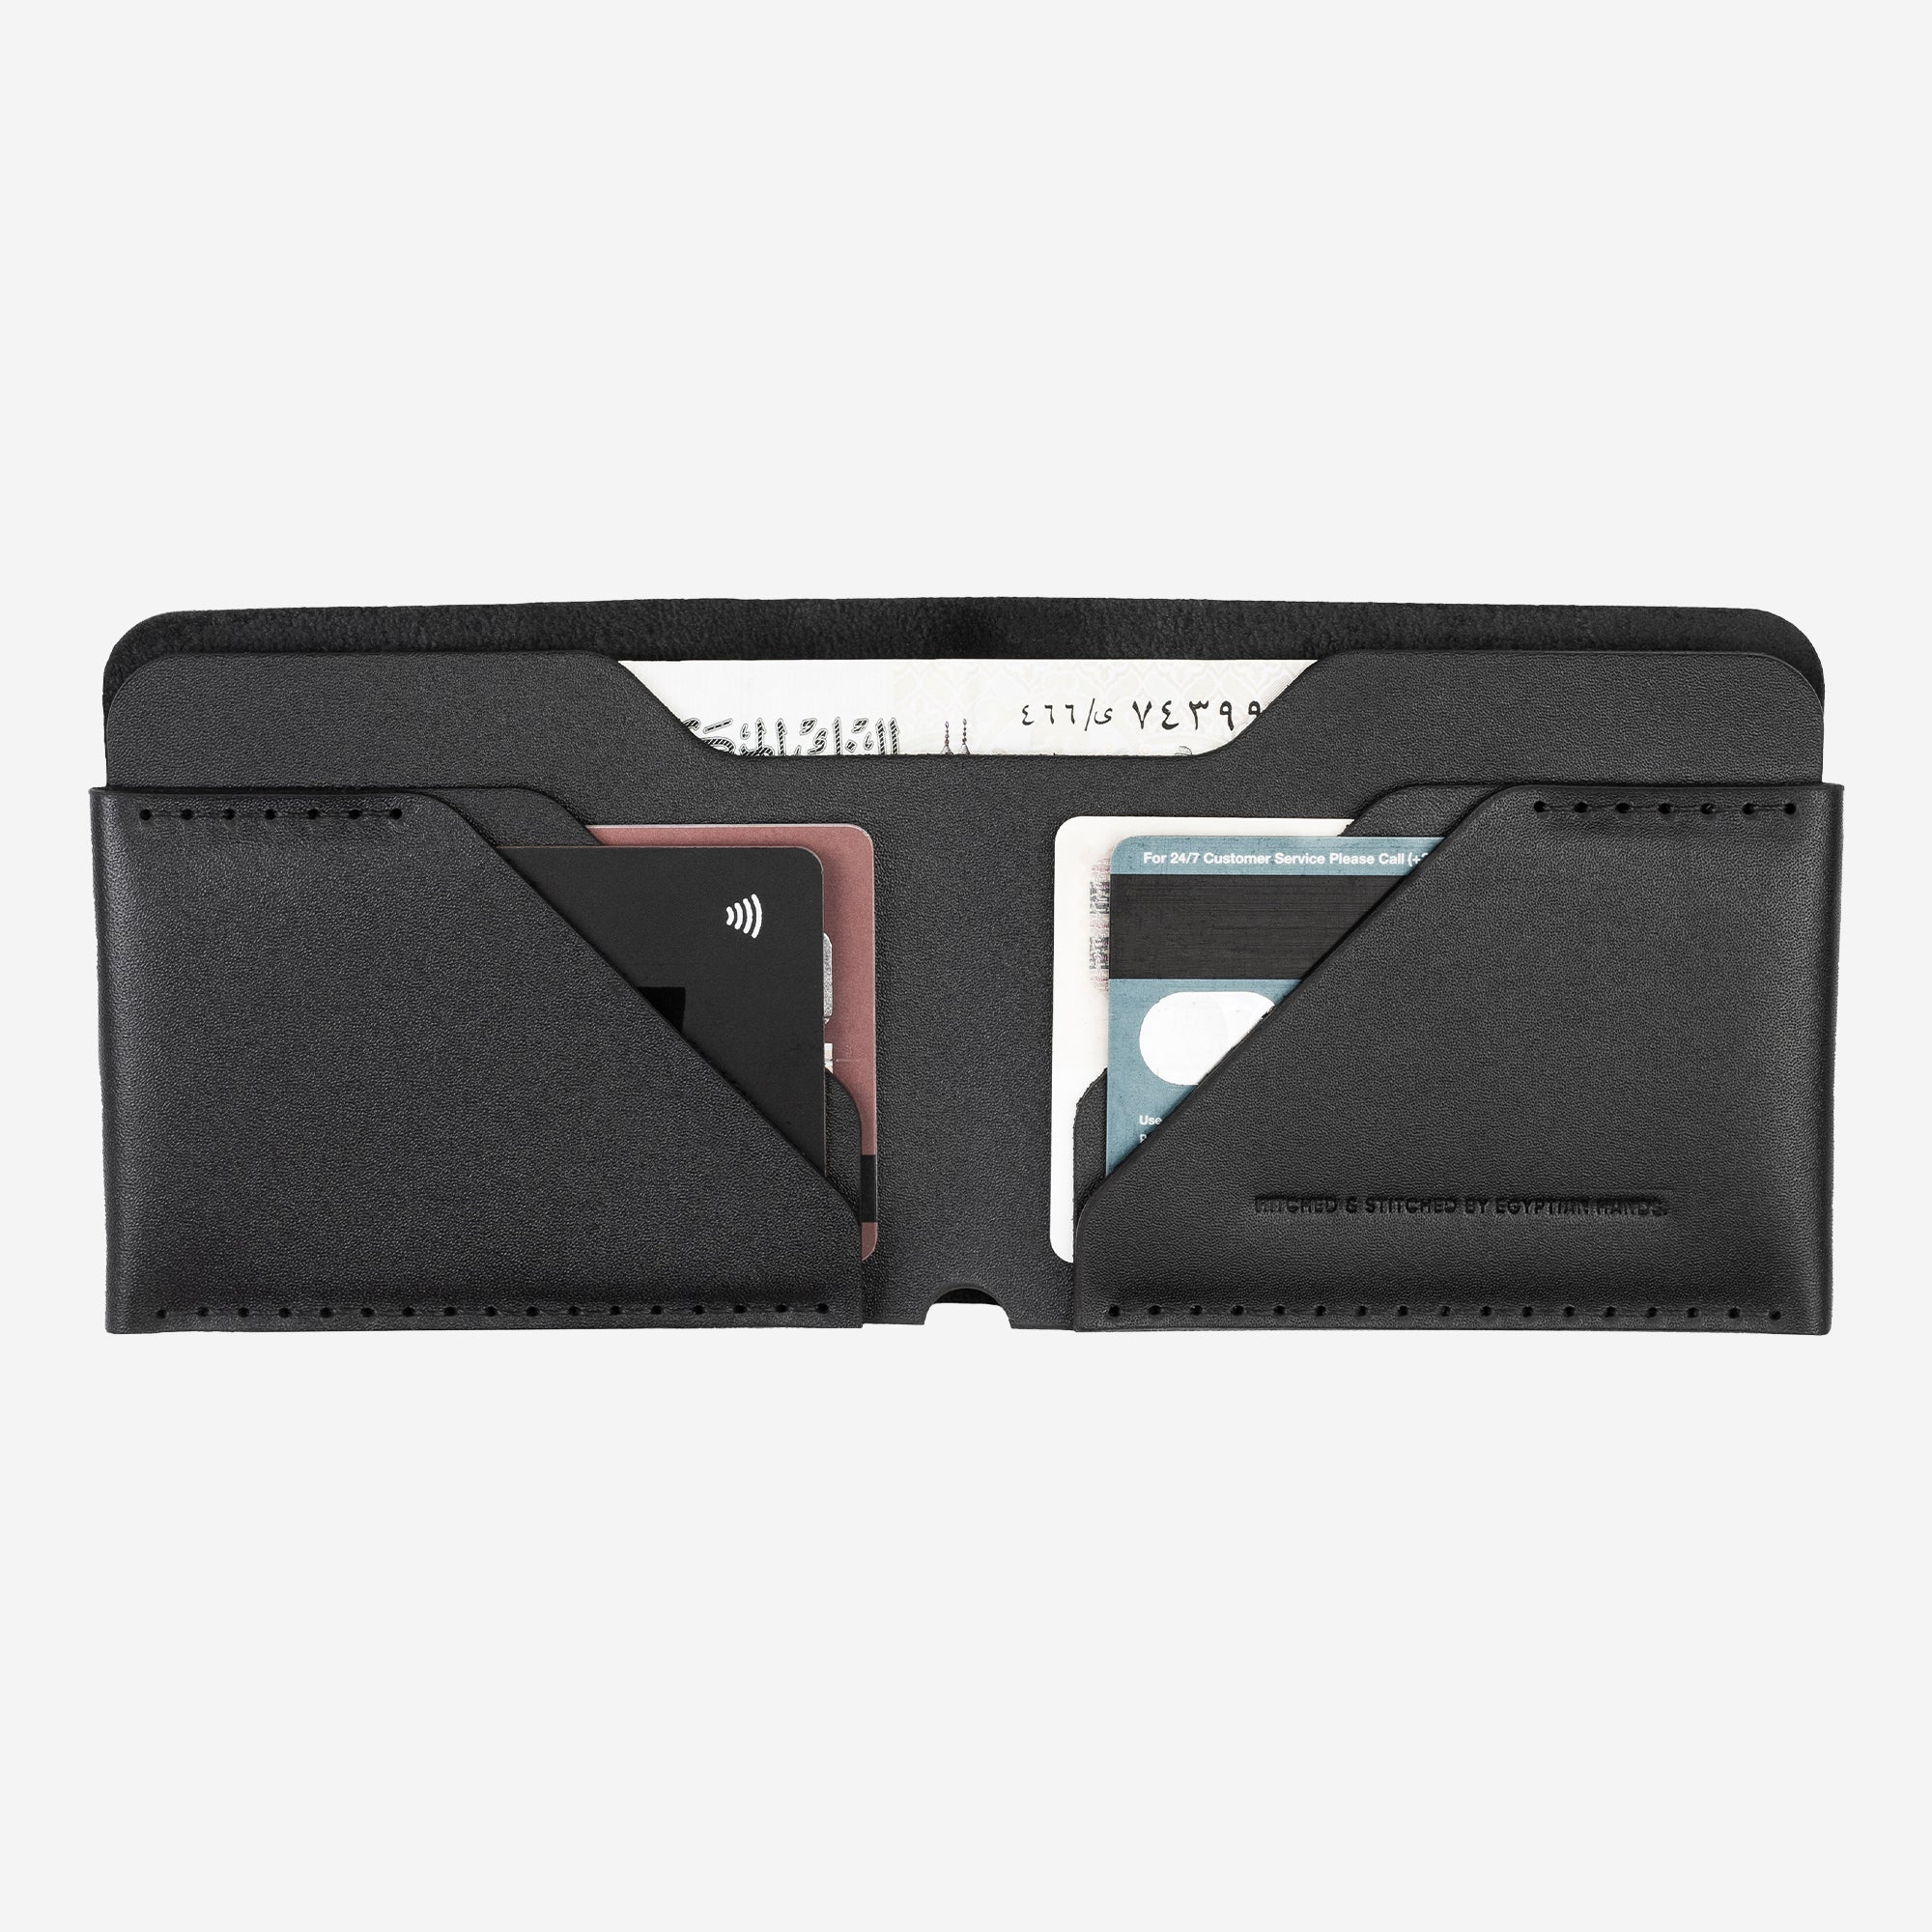 Black leather bifold wallet with credit cards and cash isolated on white background.